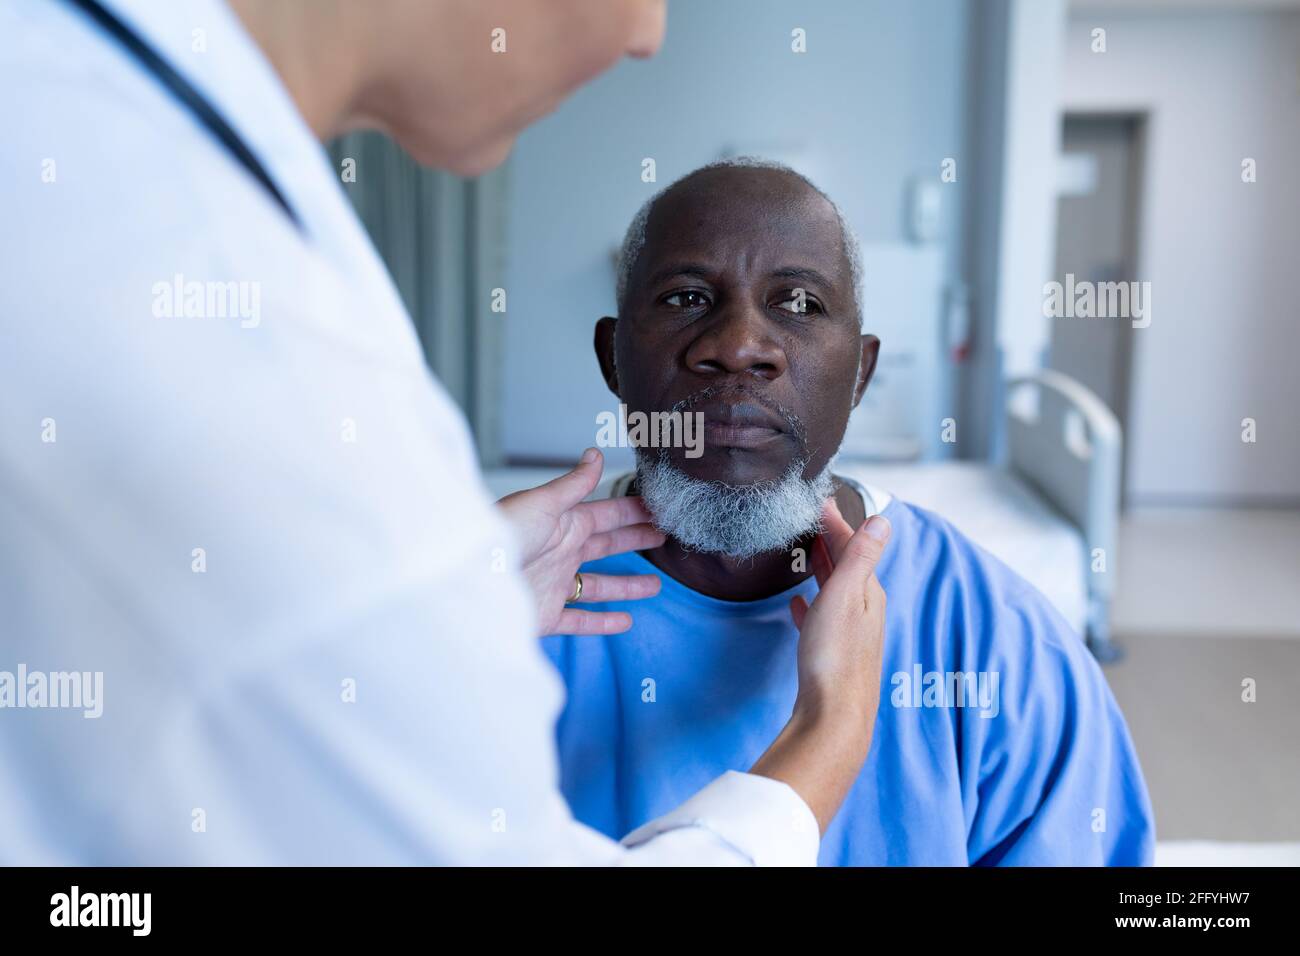 Caucasian female doctor palpating lymph nodes of african american male patient Stock Photo